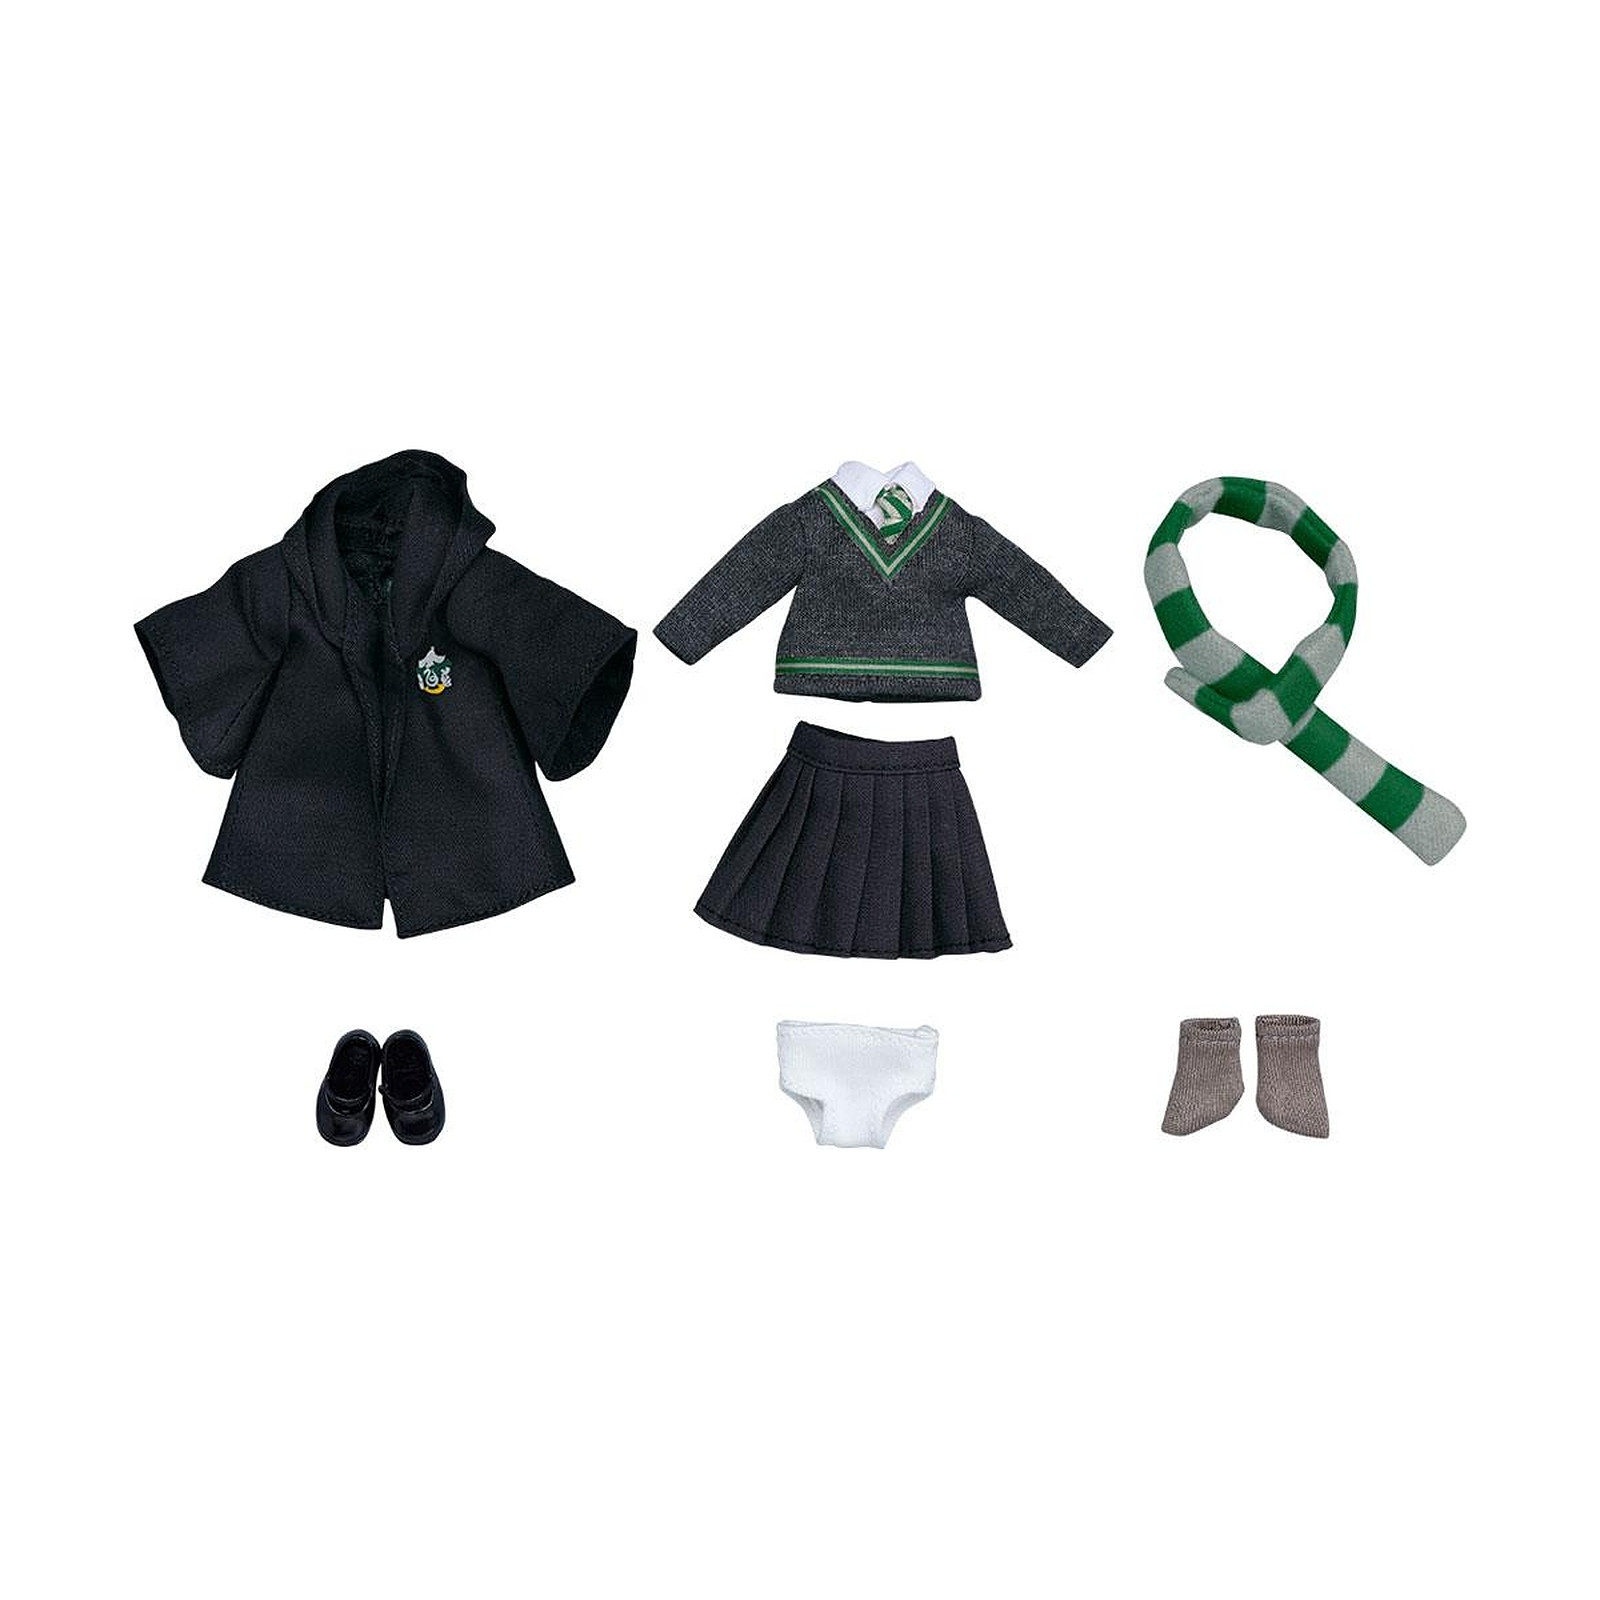 Harry Potter - Accessoires pour figurines Nendoroid Doll Outfit Set (Slytherin Uniform - Girl) - Figurines Good Smile Company